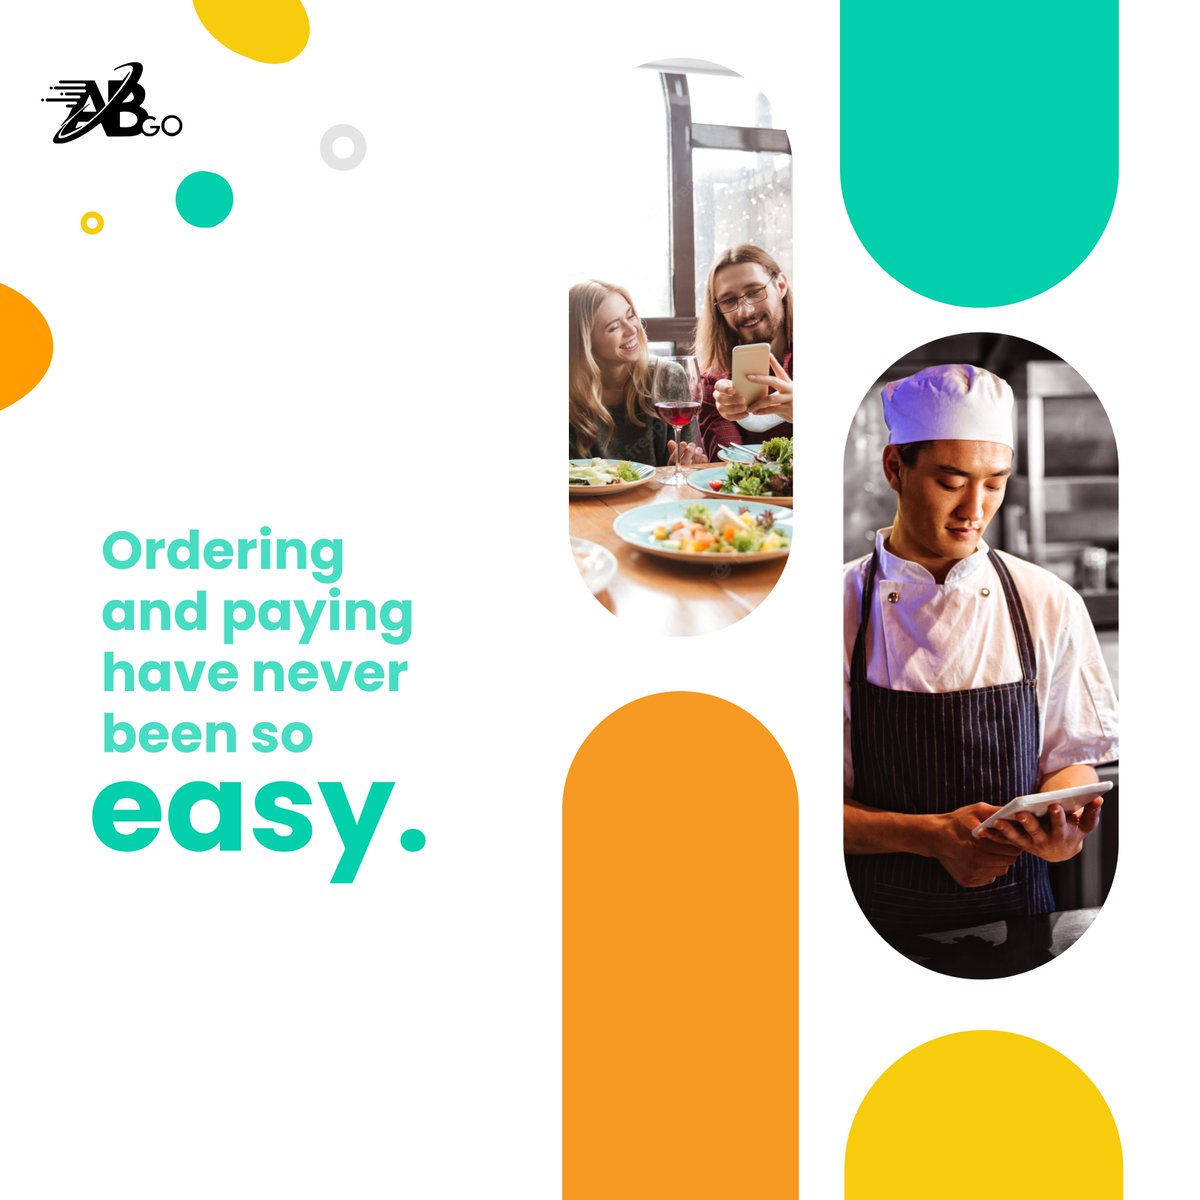 With our seamless solutions, your business can provide a smoother, more convenient experience for your customers. Say goodbye to hassles and hello to efficiency! 

#SimplifyBusiness #EasyOrdering #SeamlessPayments #abgoeats #restaurant #customerservice #app #food #delivery